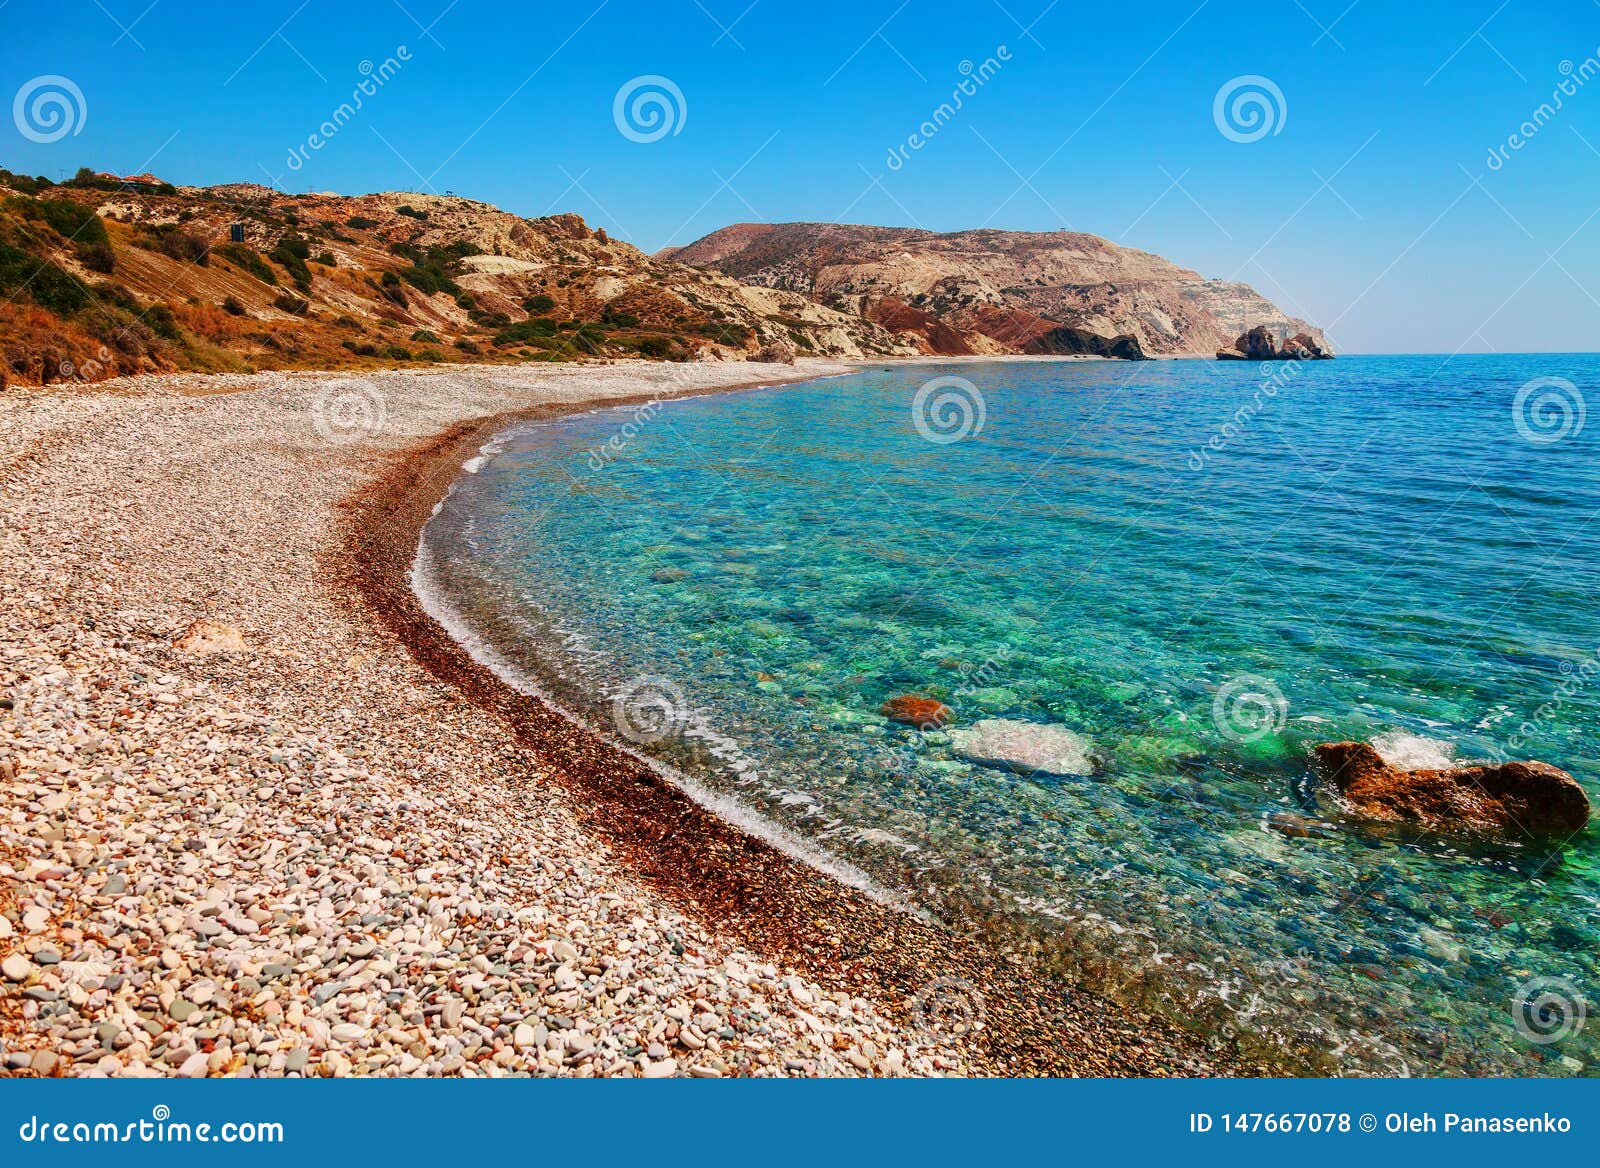 beautiful beach on petra tou romiou (the rock of the greek), aphrodite& 39;s legendary birthplace in paphos, cyprus island,